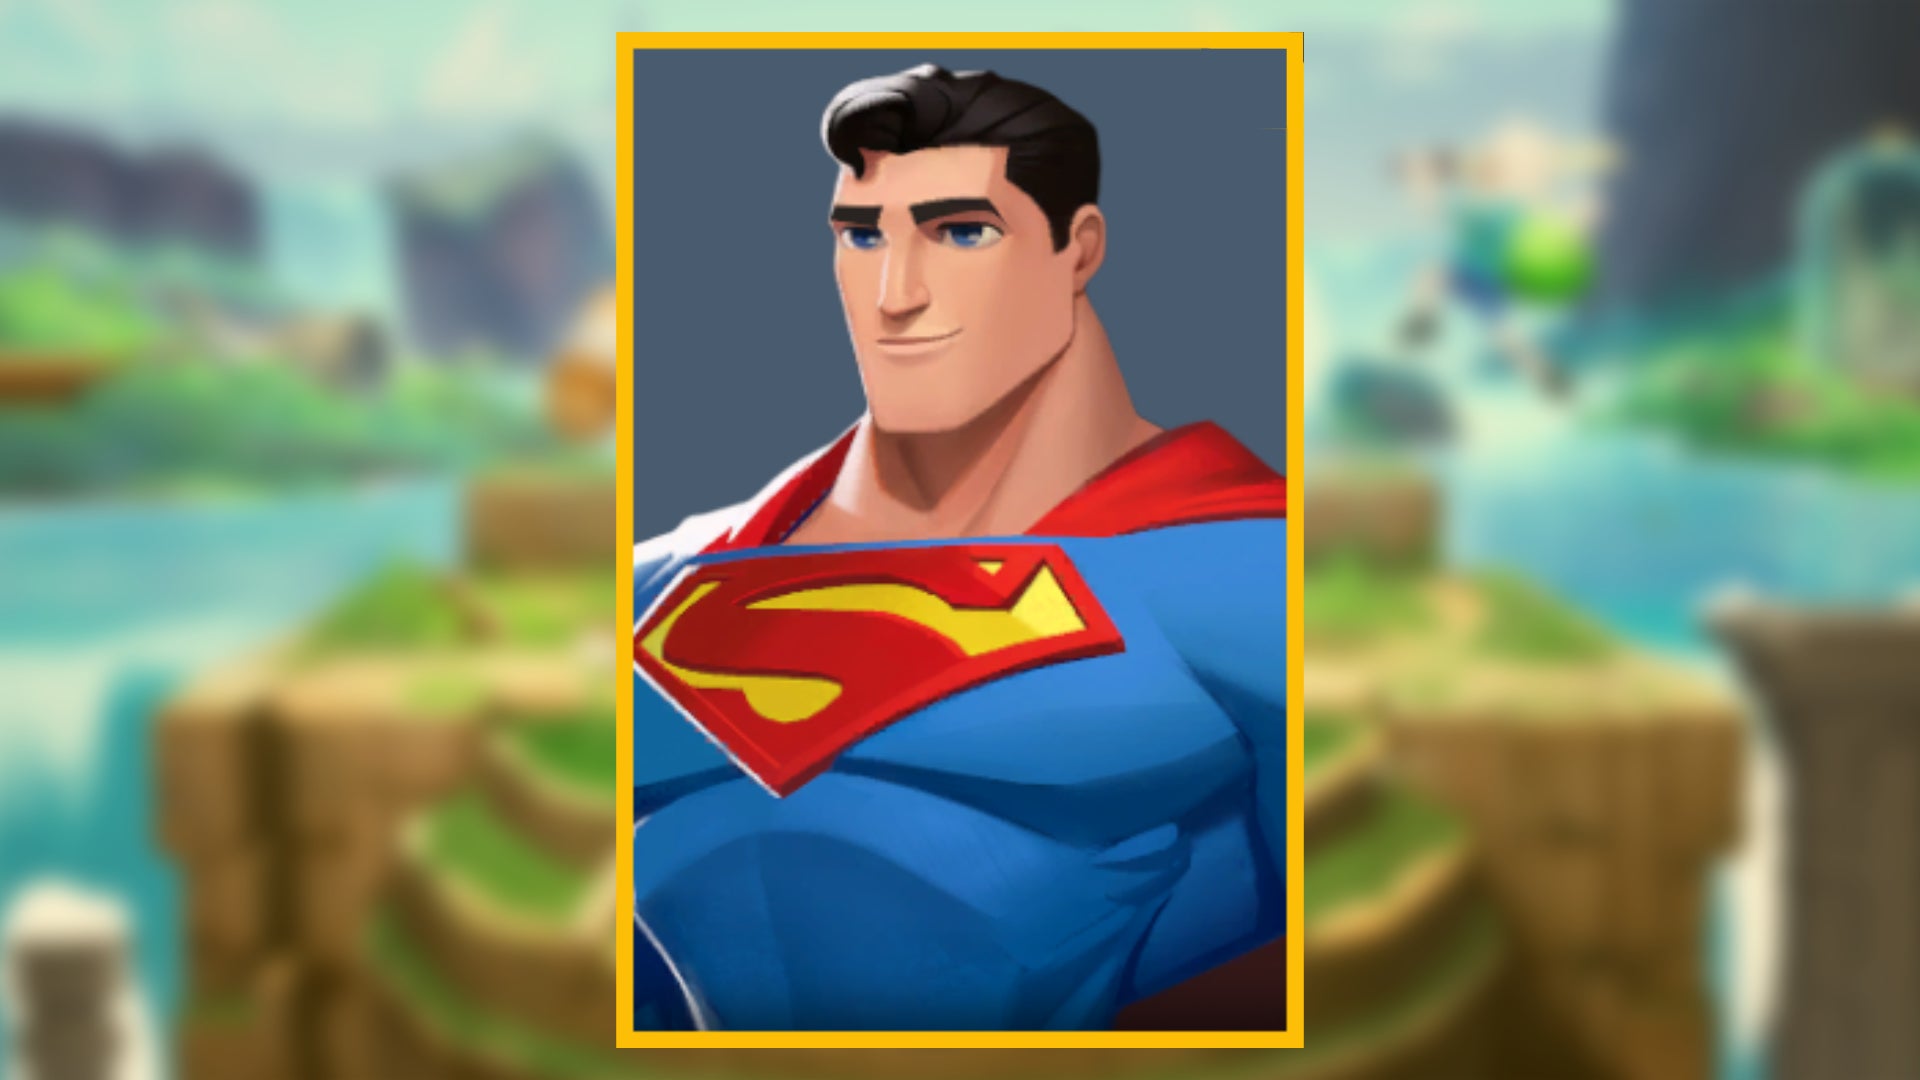 The character portrait of Superman, a playable character in MultiVersus, against a blurred background.